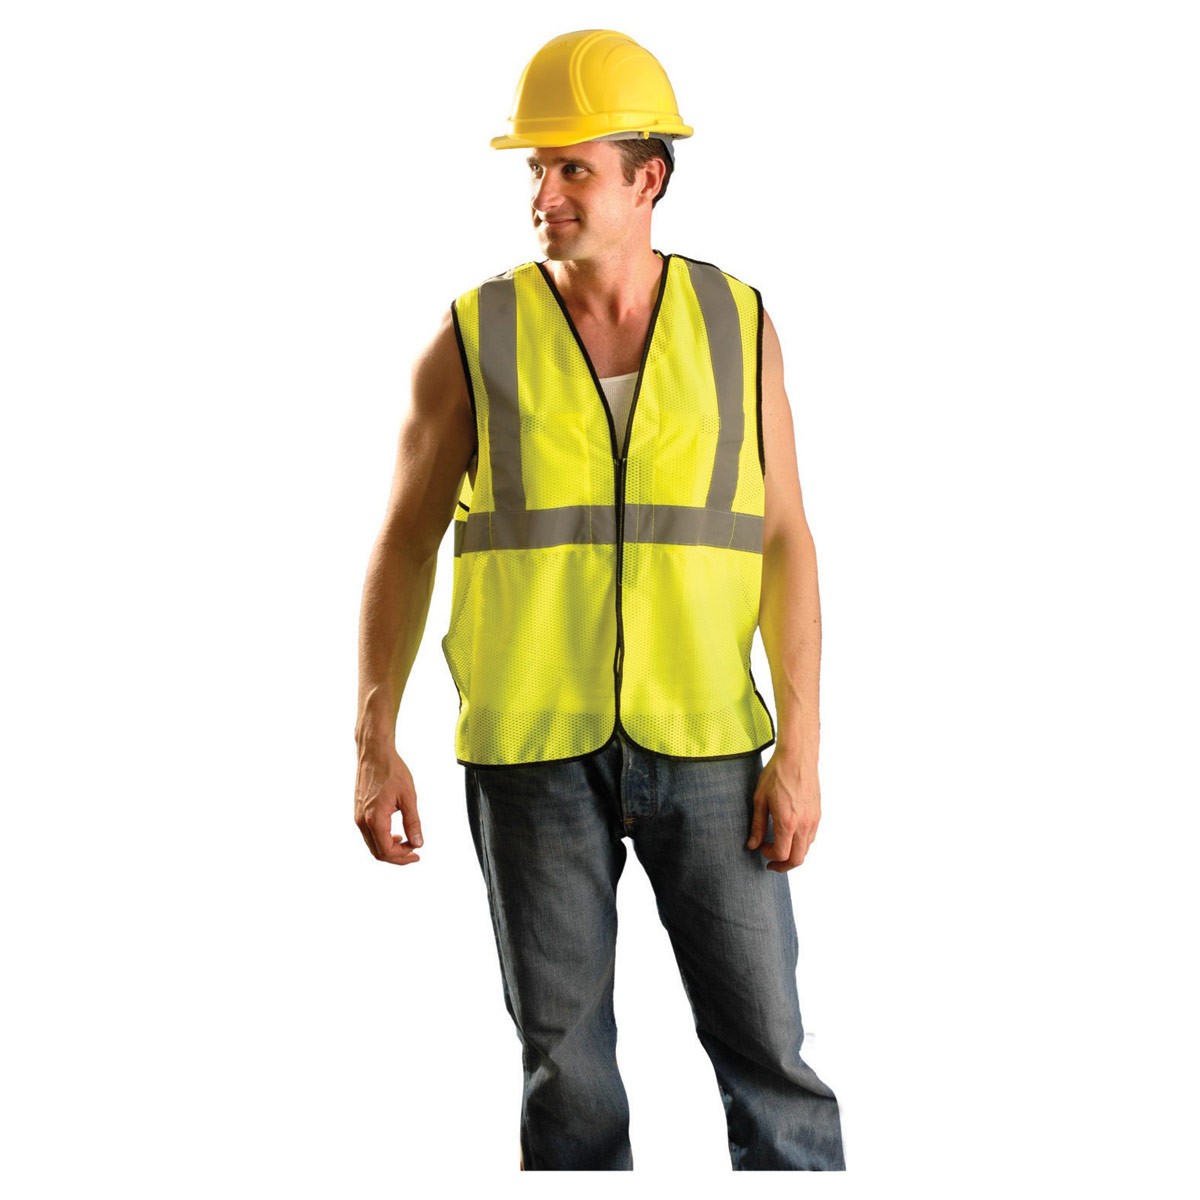 high visibility apparel/clothing Class II Mesh polyester mesh Safety Vest